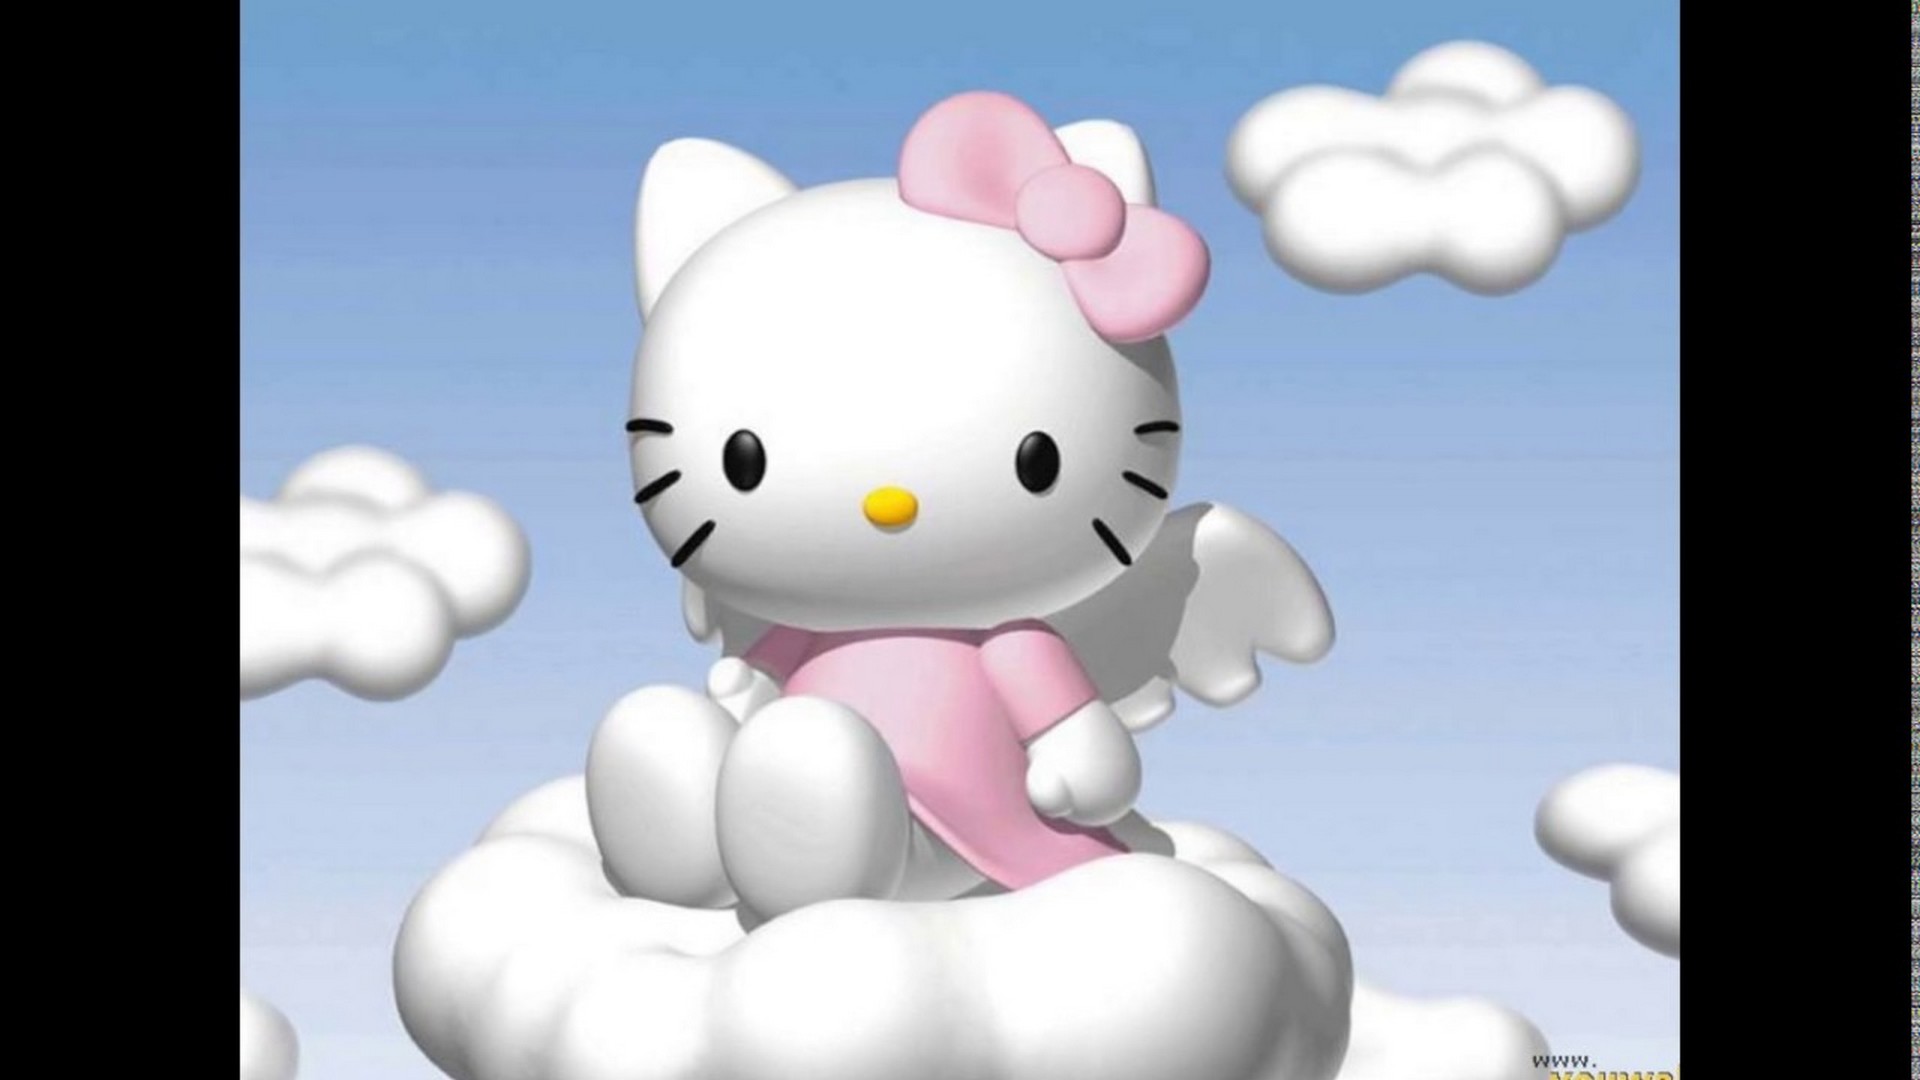 Sanrio Hello Kitty Wallpaper with image resolution 1920x1080 pixel. You can use this wallpaper as background for your desktop Computer Screensavers, Android or iPhone smartphones